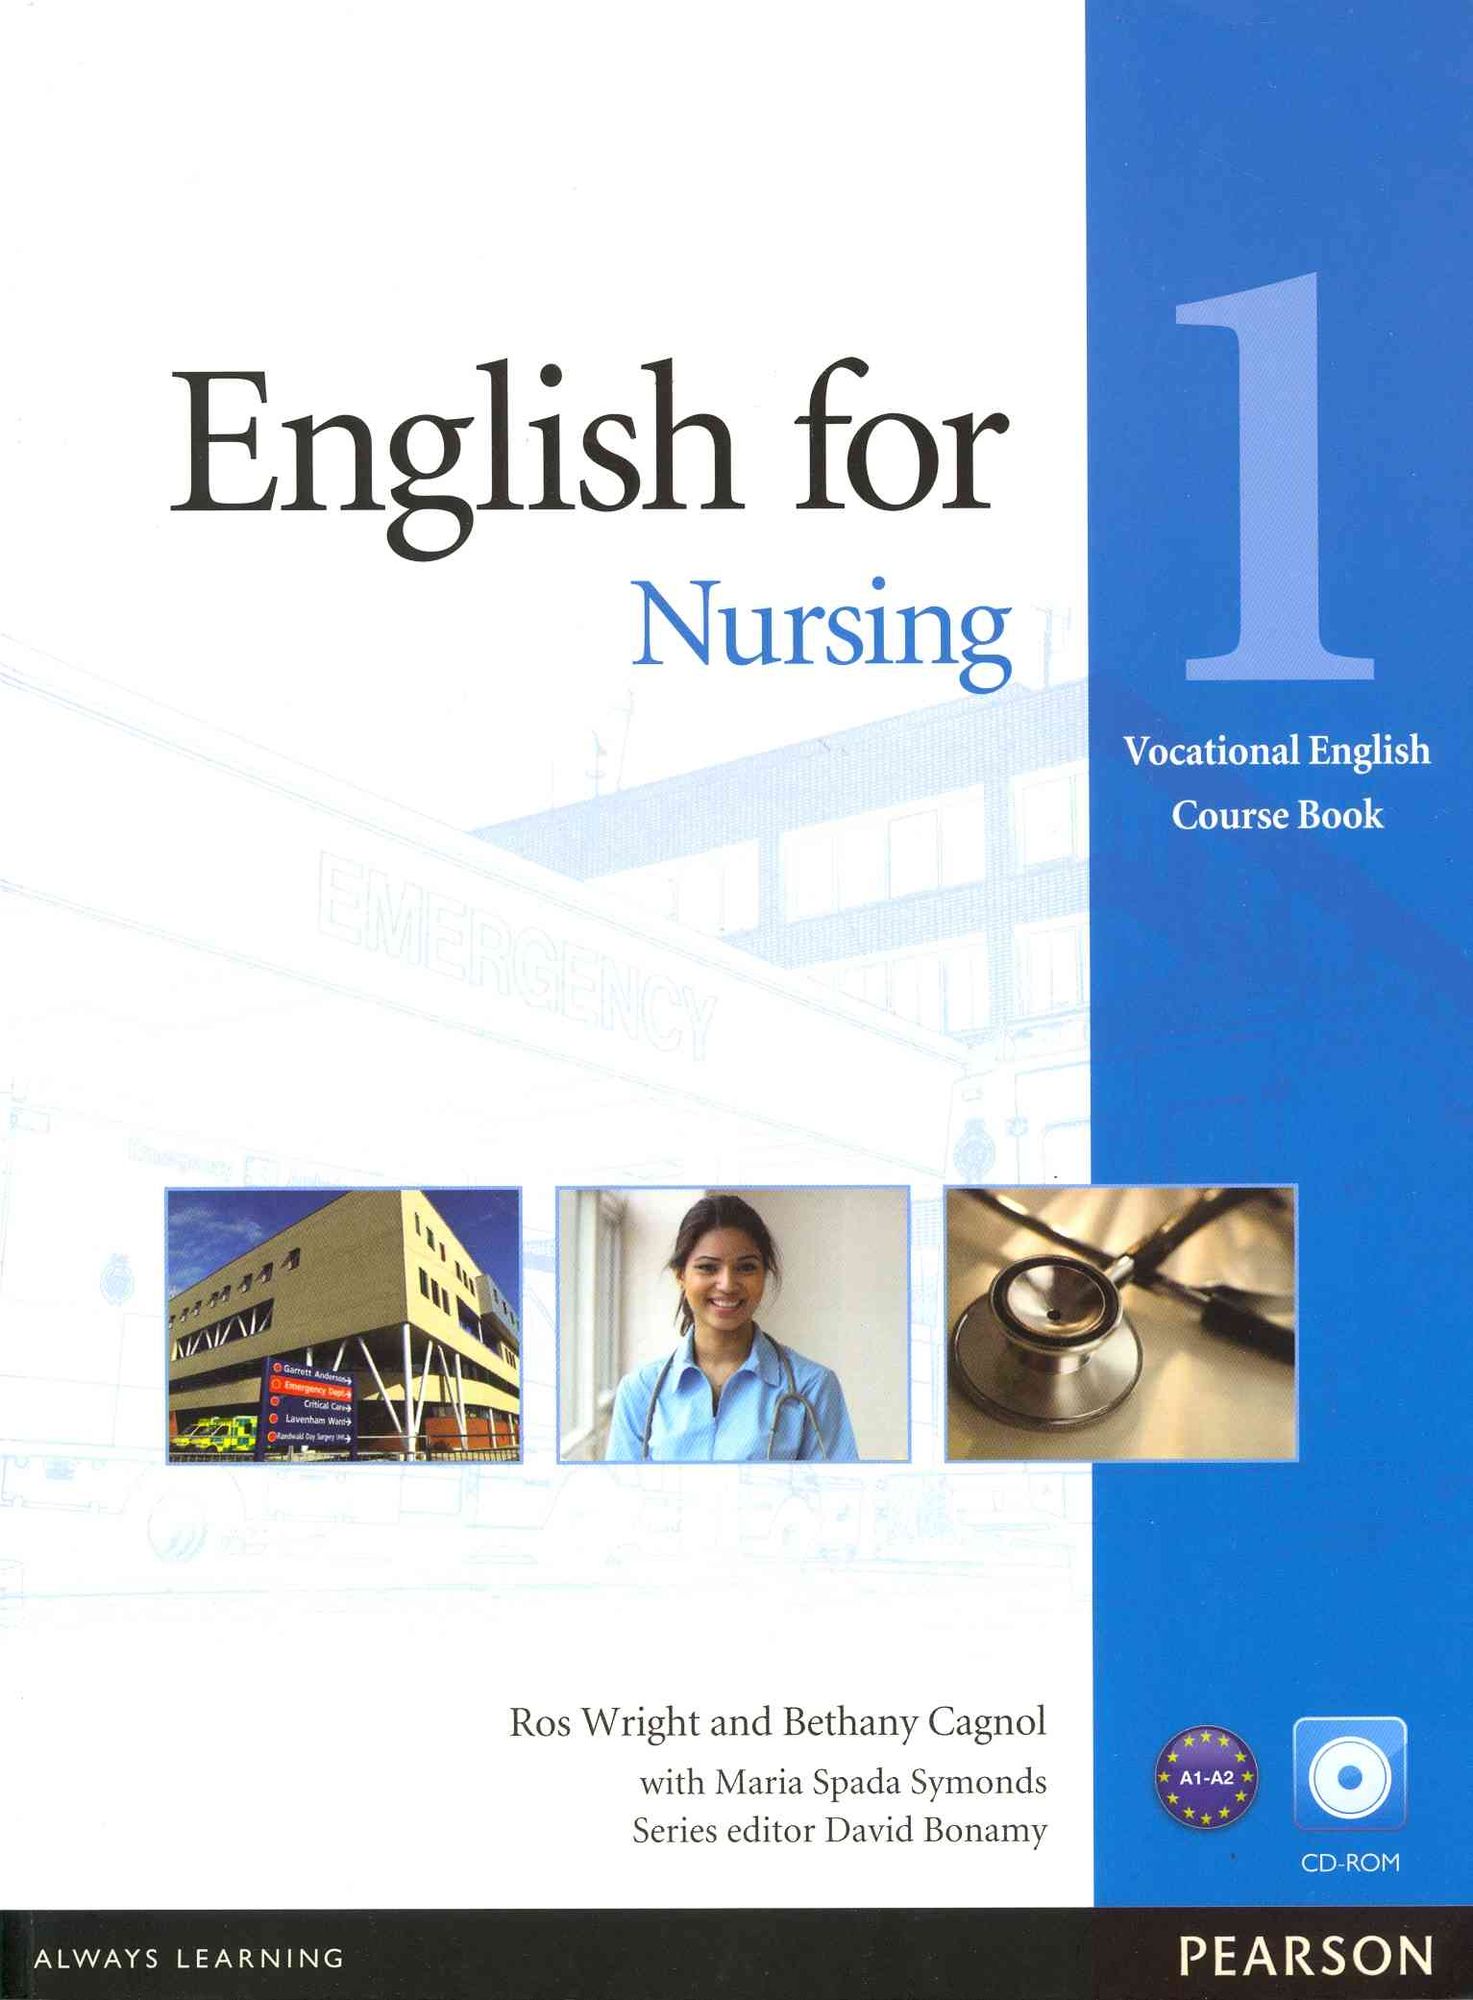 Schulbuch　'978-1-4082-6993-0'　CD-ROM'　R:　for　Nursing　and　Coursebook　Level　English　Wright,　'Englisch'